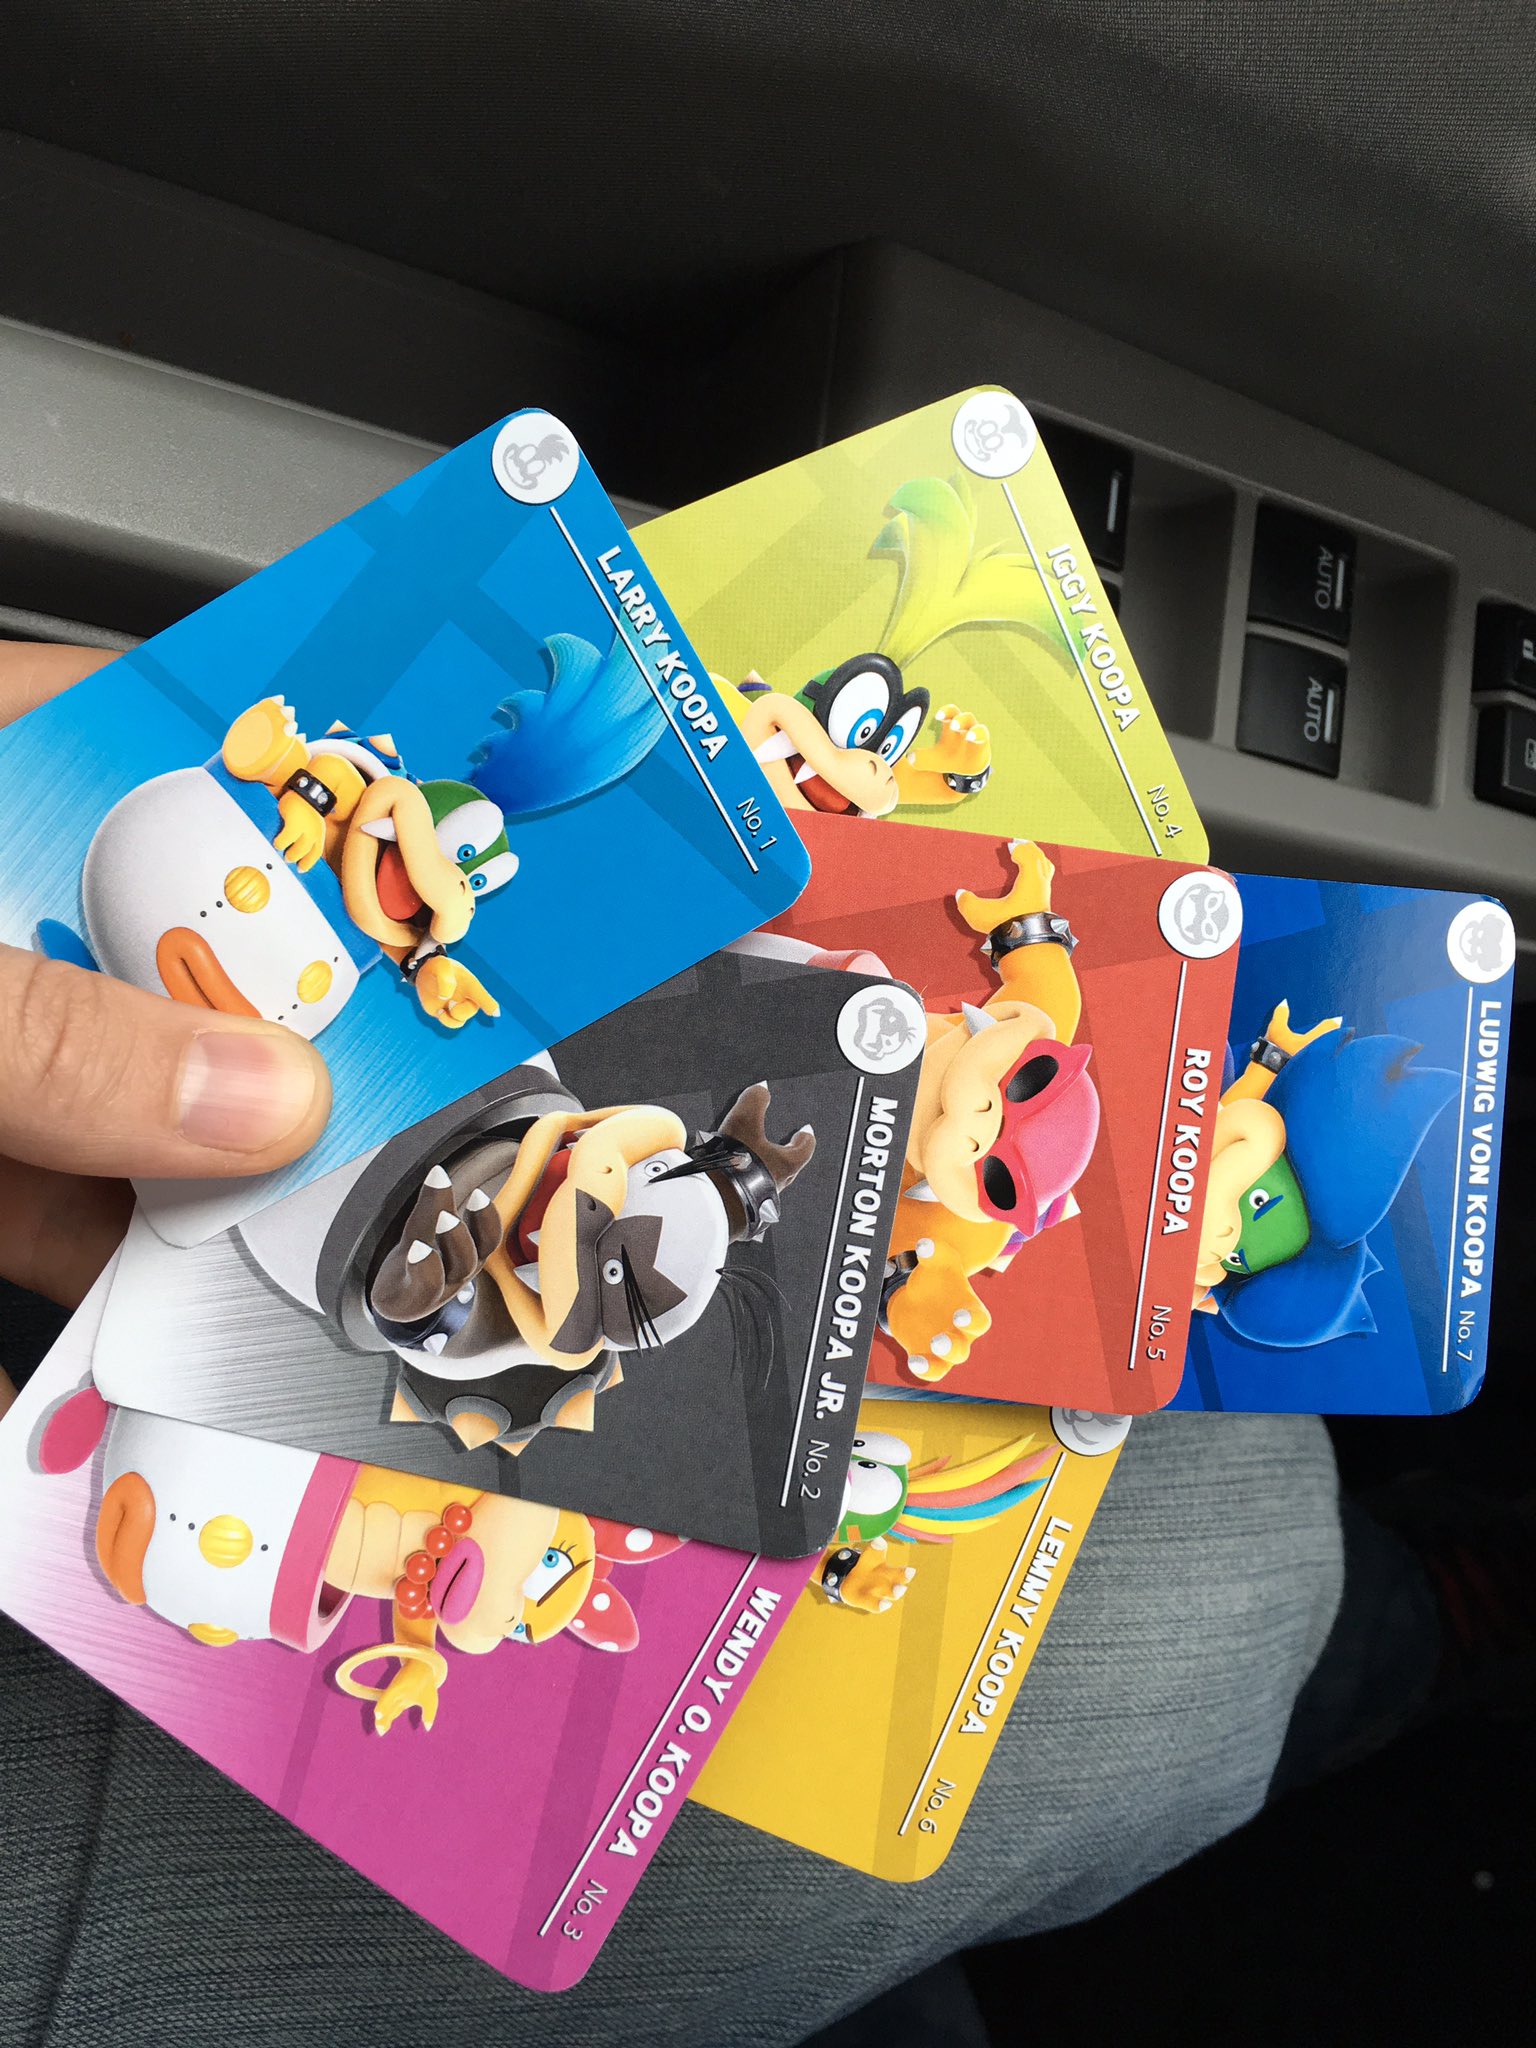 Amiibo News on Twitter: "Our friend @CustomConquest is giving away custom  Koopaling amiibo cards that scan! Details: https://t.co/7uuCaZB0gq  https://t.co/DC8bta6HpF" / Twitter